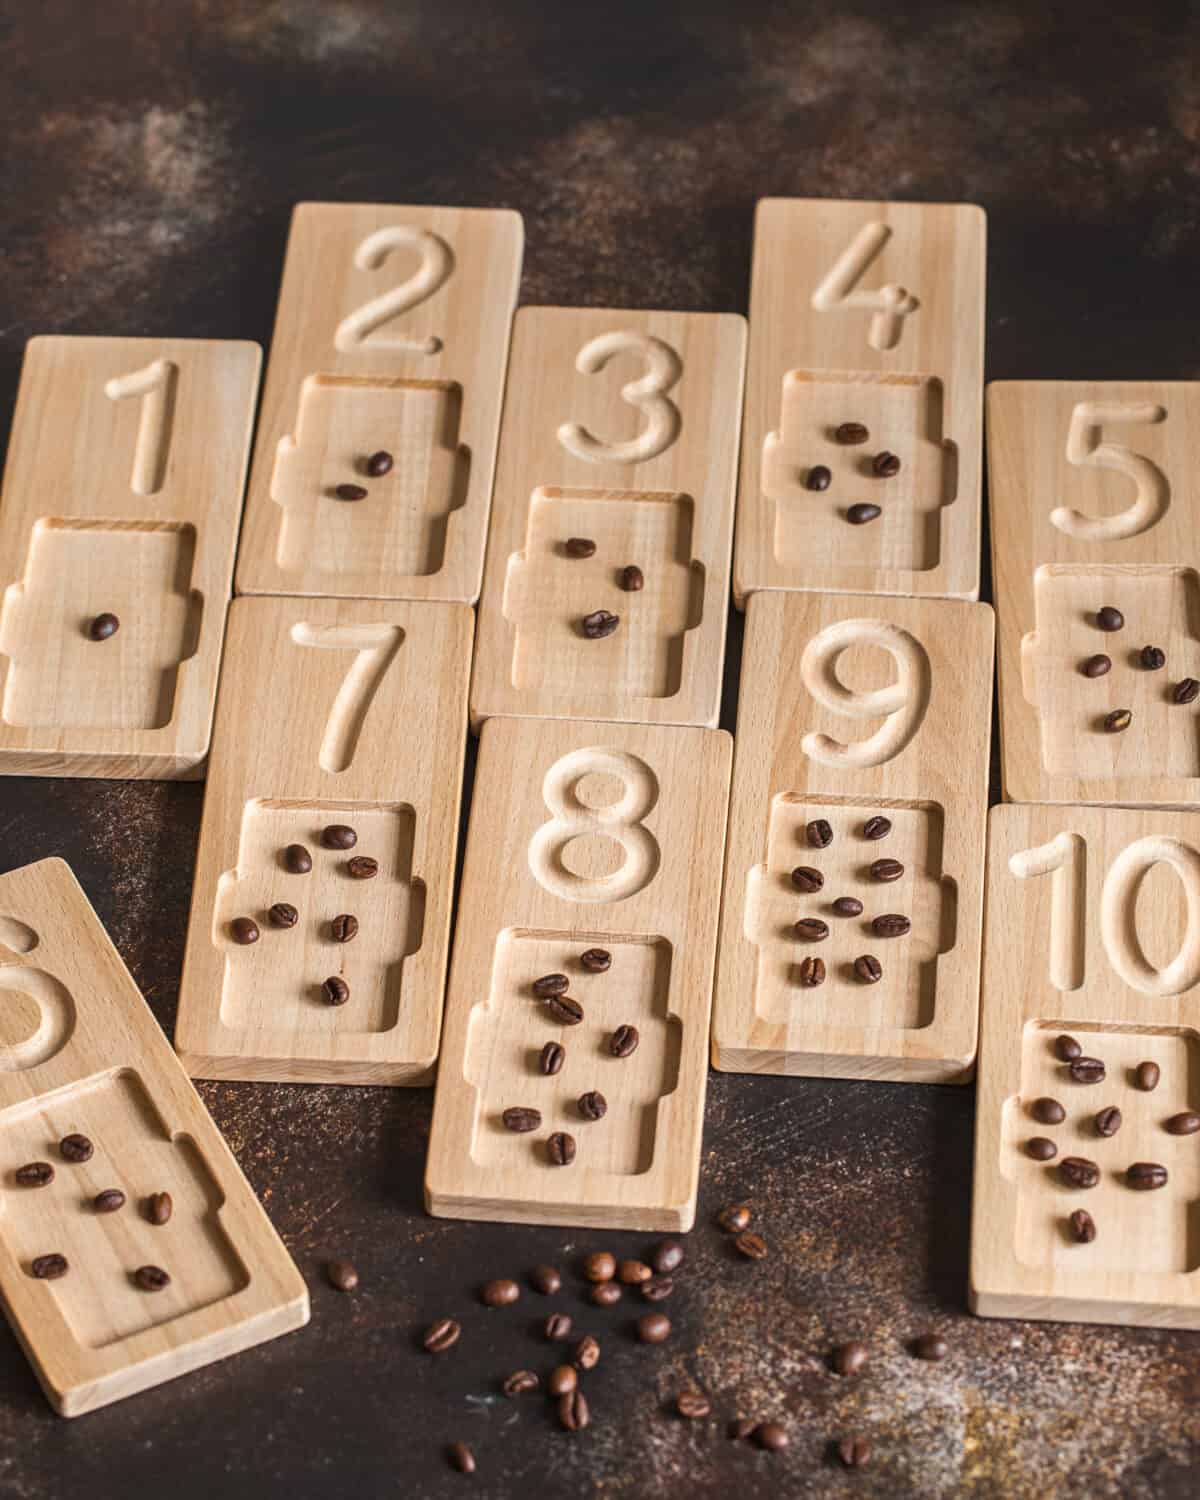 Wooden counting and writing trays with coffee beans for educating littles on number writing, fine motor skills, hand eye coordination, mathematical skills. Montessori materials. Counting math game